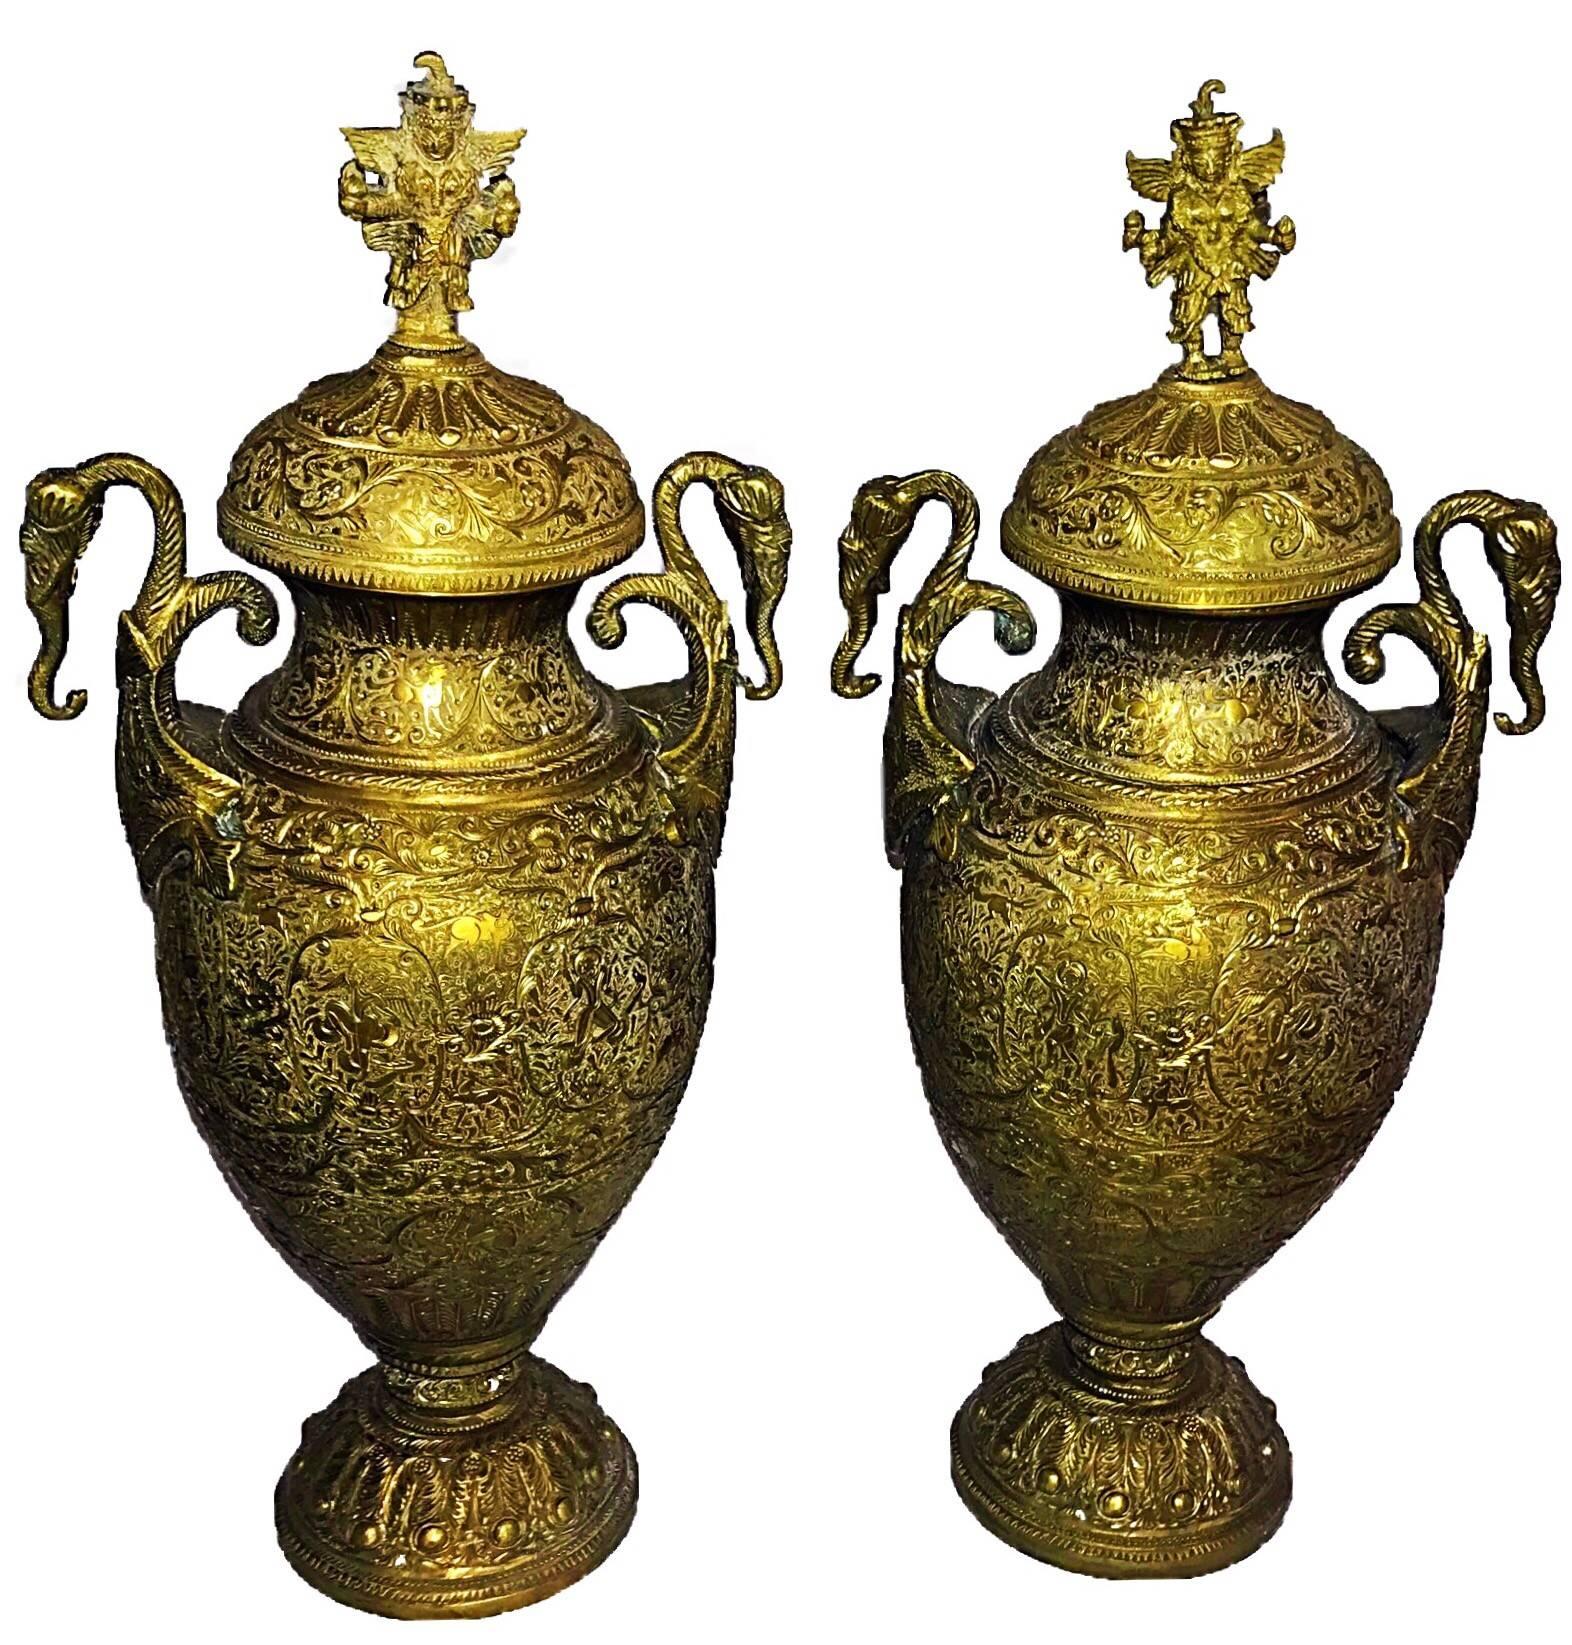 Large Pair of 19th Century Brass Lidded Indian Deity Vase or Urns For Sale